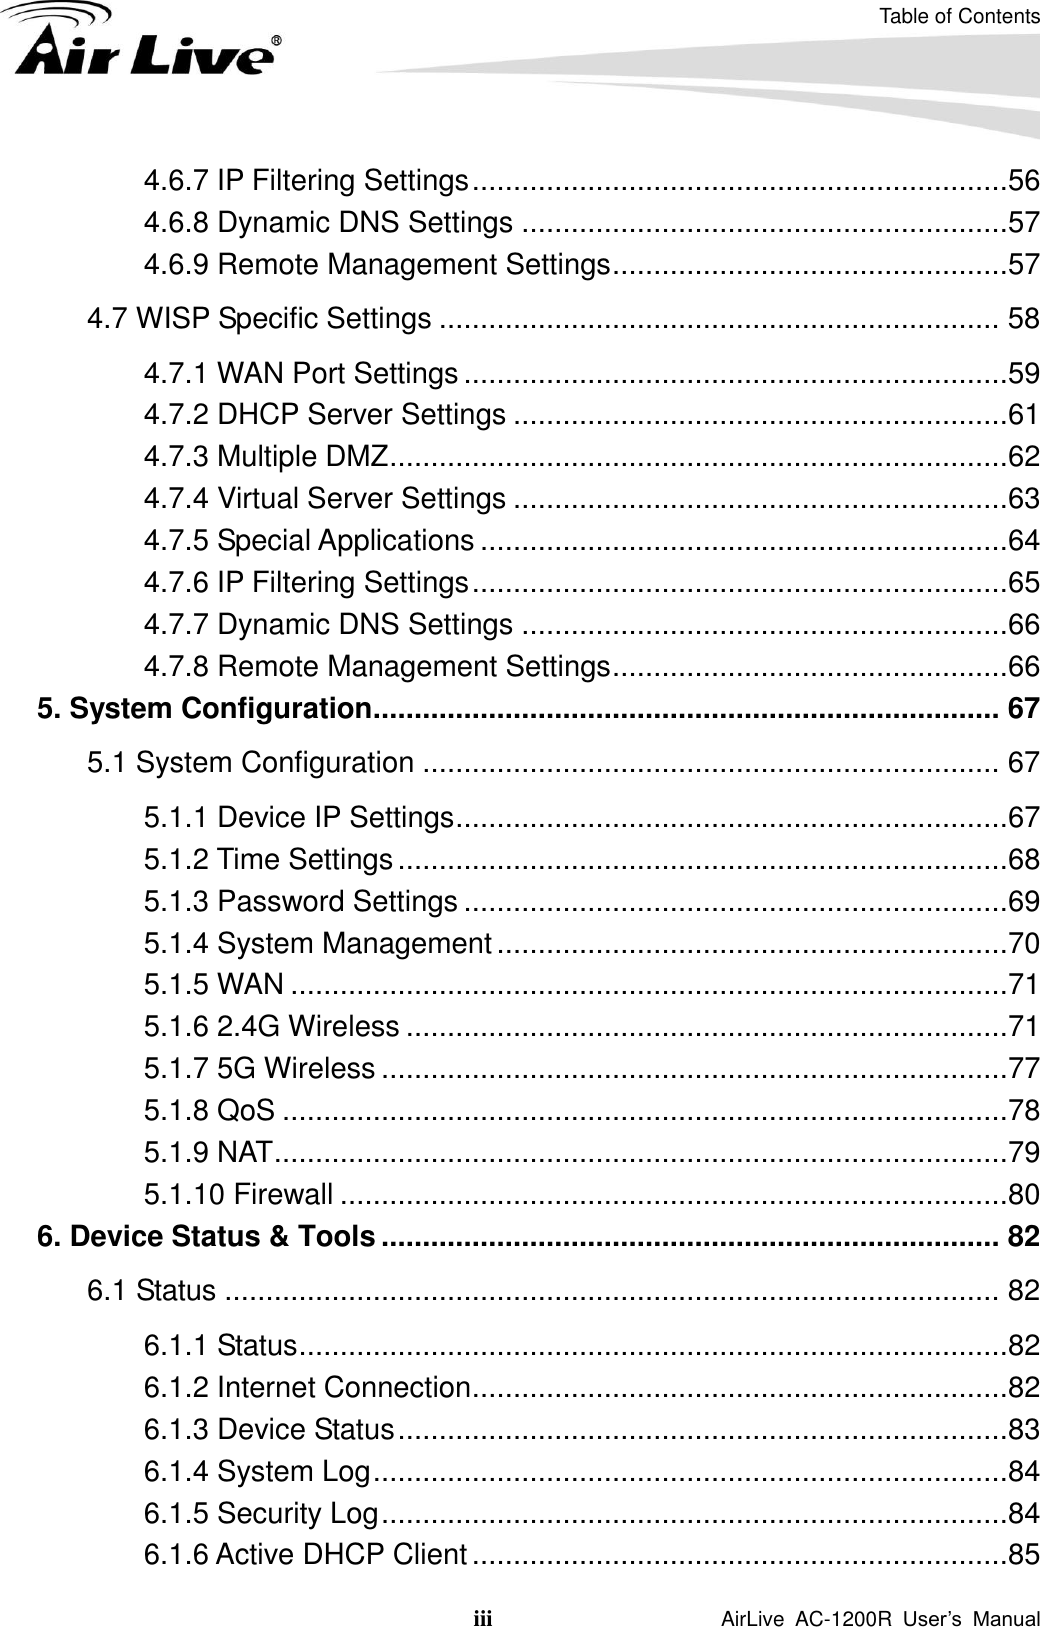 Table of Contents iii                    AirLive  AC-1200R  User’s  Manual 4.6.7 IP Filtering Settings .................................................................56 4.6.8 Dynamic DNS Settings ...........................................................57 4.6.9 Remote Management Settings ................................................57 4.7 WISP Specific Settings .................................................................... 58 4.7.1 WAN Port Settings ..................................................................59 4.7.2 DHCP Server Settings ............................................................61 4.7.3 Multiple DMZ ...........................................................................62 4.7.4 Virtual Server Settings ............................................................63 4.7.5 Special Applications ................................................................64 4.7.6 IP Filtering Settings .................................................................65 4.7.7 Dynamic DNS Settings ...........................................................66 4.7.8 Remote Management Settings ................................................66 5. System Configuration ............................................................................ 67 5.1 System Configuration ...................................................................... 67 5.1.1 Device IP Settings ...................................................................67 5.1.2 Time Settings ..........................................................................68 5.1.3 Password Settings ..................................................................69 5.1.4 System Management ..............................................................70 5.1.5 WAN .......................................................................................71 5.1.6 2.4G Wireless .........................................................................71 5.1.7 5G Wireless ............................................................................77 5.1.8 QoS ........................................................................................78 5.1.9 NAT .........................................................................................79 5.1.10 Firewall .................................................................................80 6. Device Status &amp; Tools ........................................................................... 82 6.1 Status .............................................................................................. 82 6.1.1 Status ......................................................................................82 6.1.2 Internet Connection .................................................................82 6.1.3 Device Status ..........................................................................83 6.1.4 System Log .............................................................................84 6.1.5 Security Log ............................................................................84 6.1.6 Active DHCP Client .................................................................85 